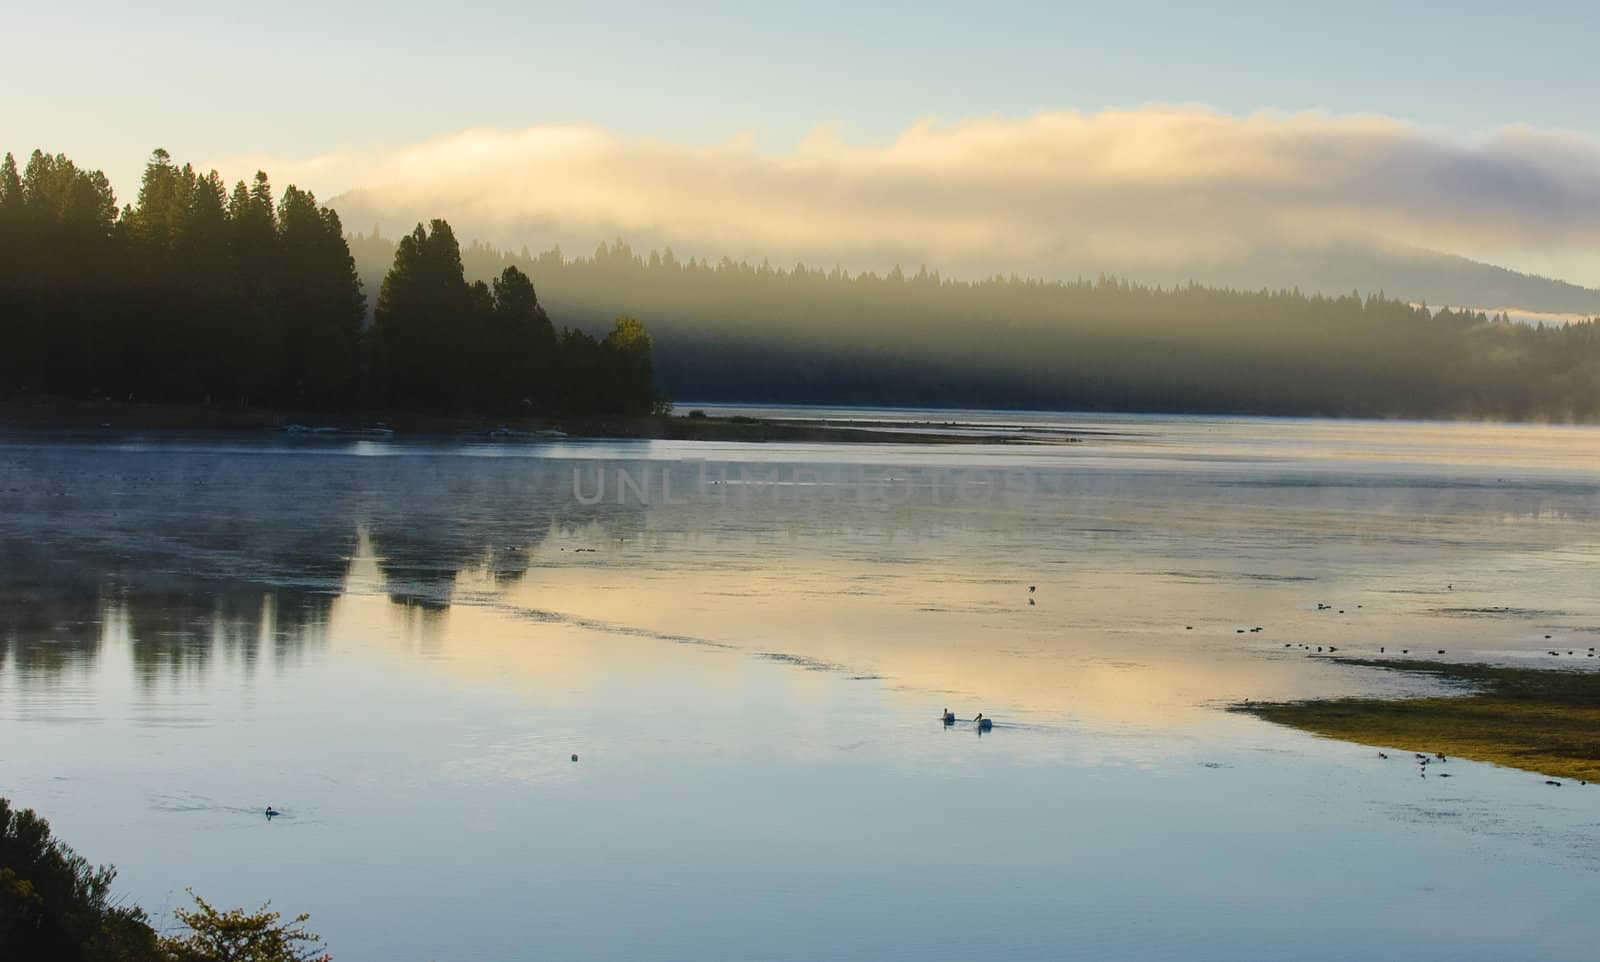 pelicans swimming on a misty morning sunrise on Lake Almanor, northern California